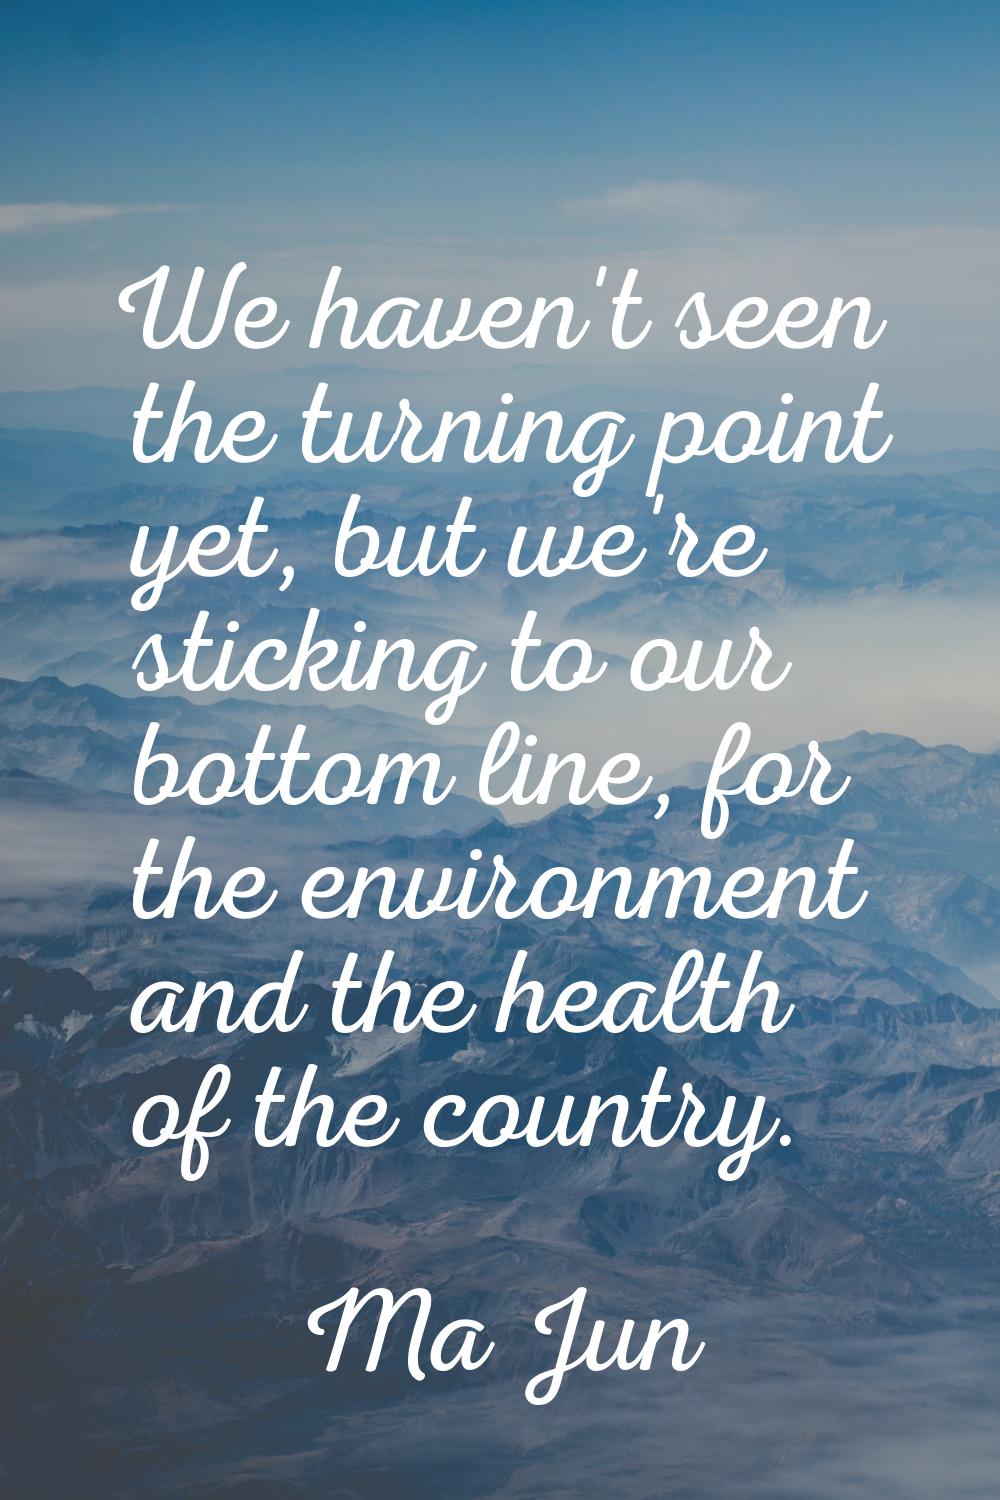 We haven't seen the turning point yet, but we're sticking to our bottom line, for the environment a